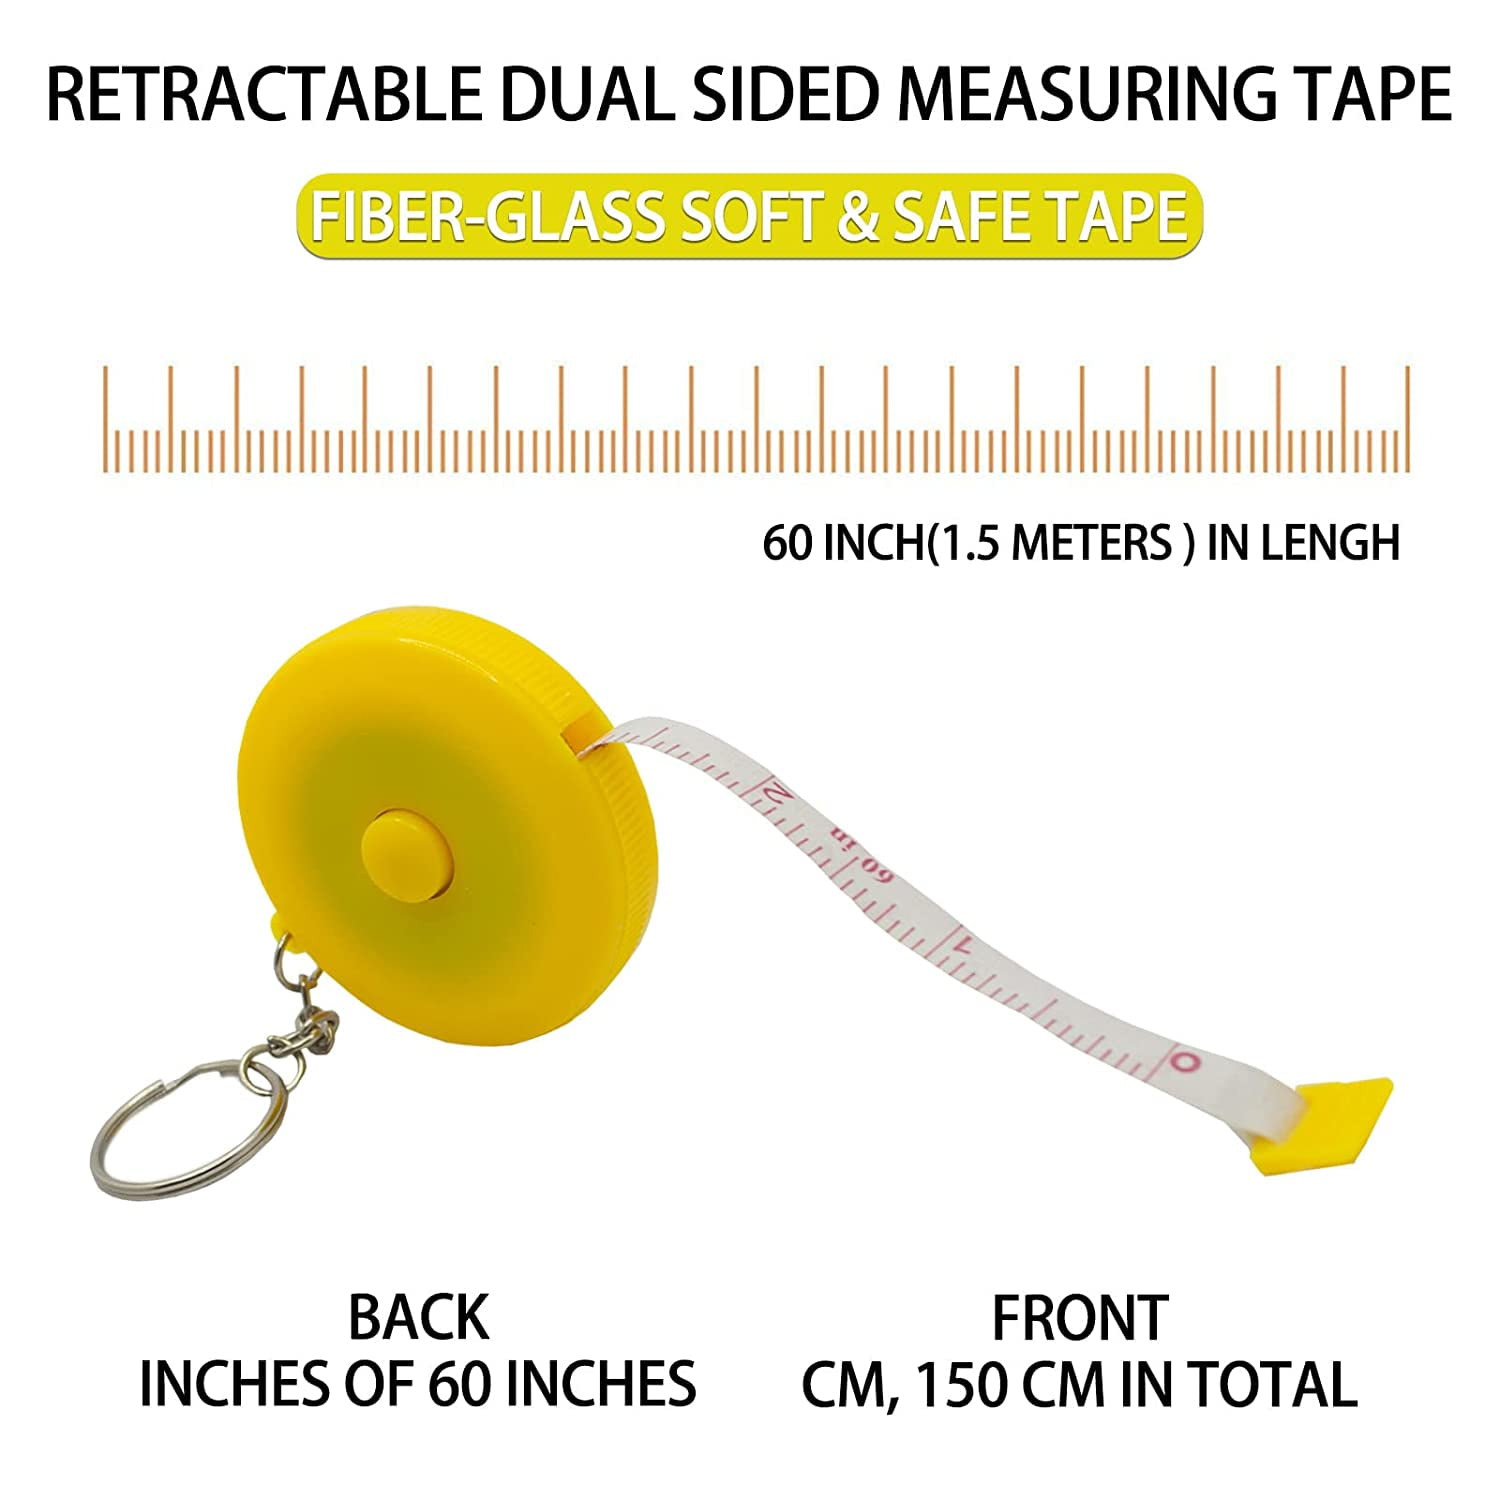 1byone 60-inch Tape Measure for Body Fat Measuring & Calculating